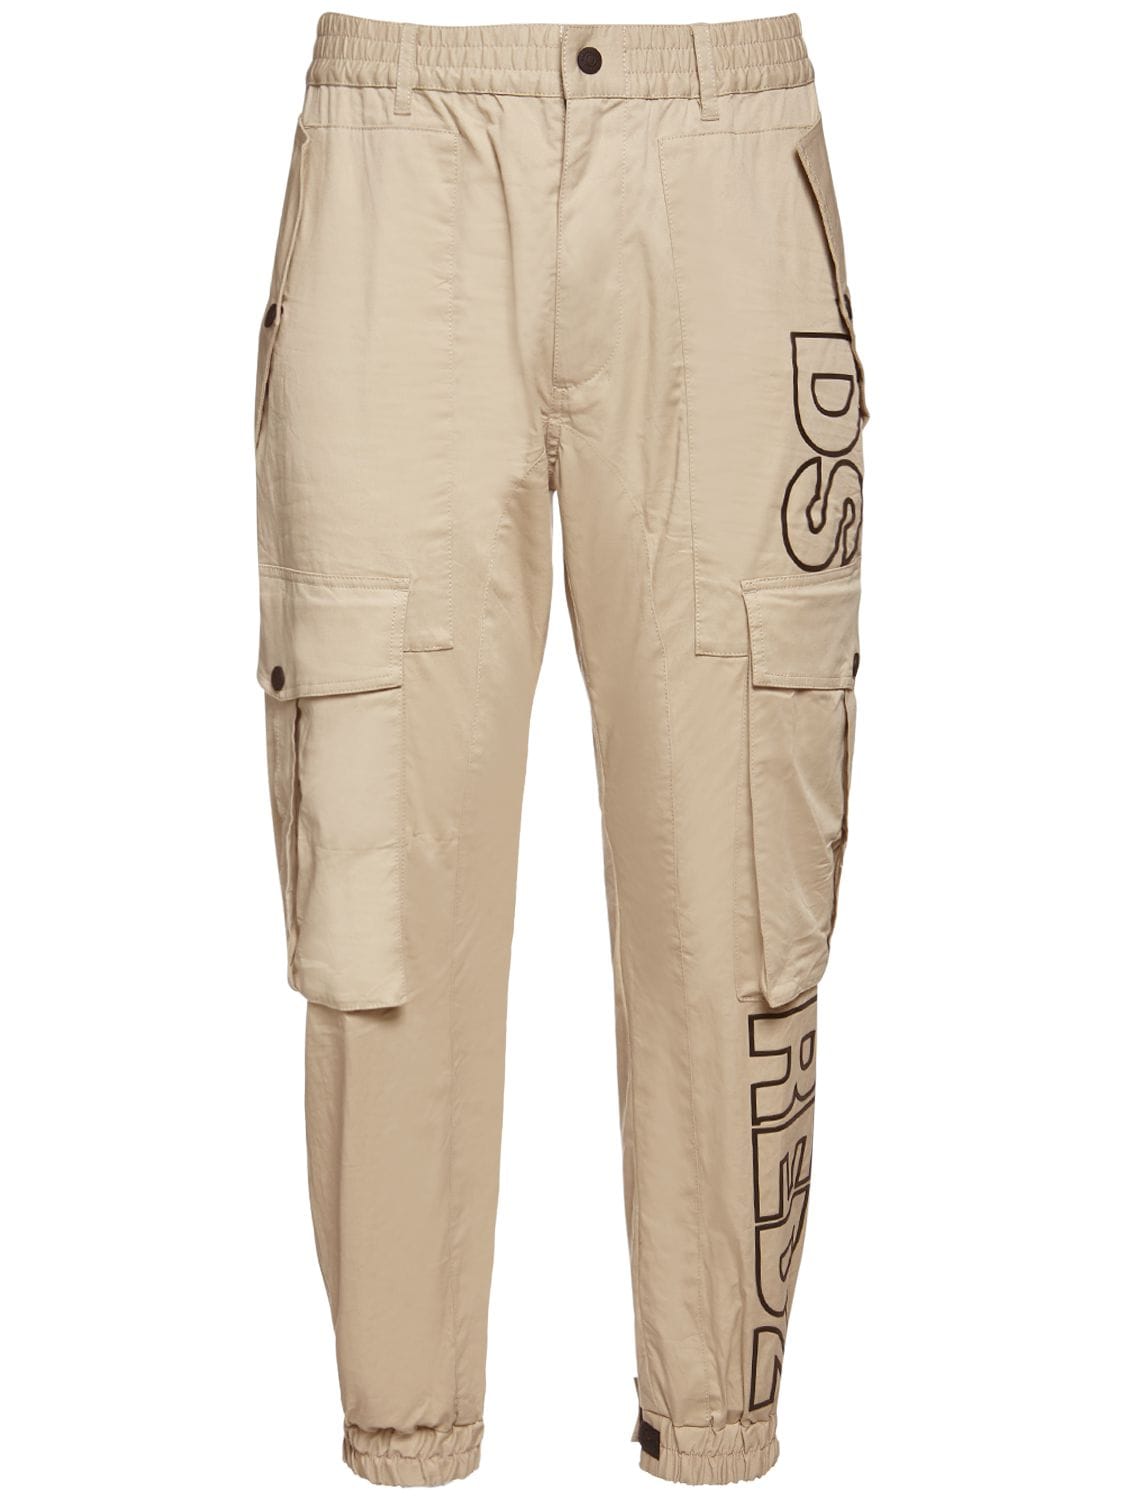 DSQUARED² Cyprus Stretch Cotton Twill Cargo Pants for Men